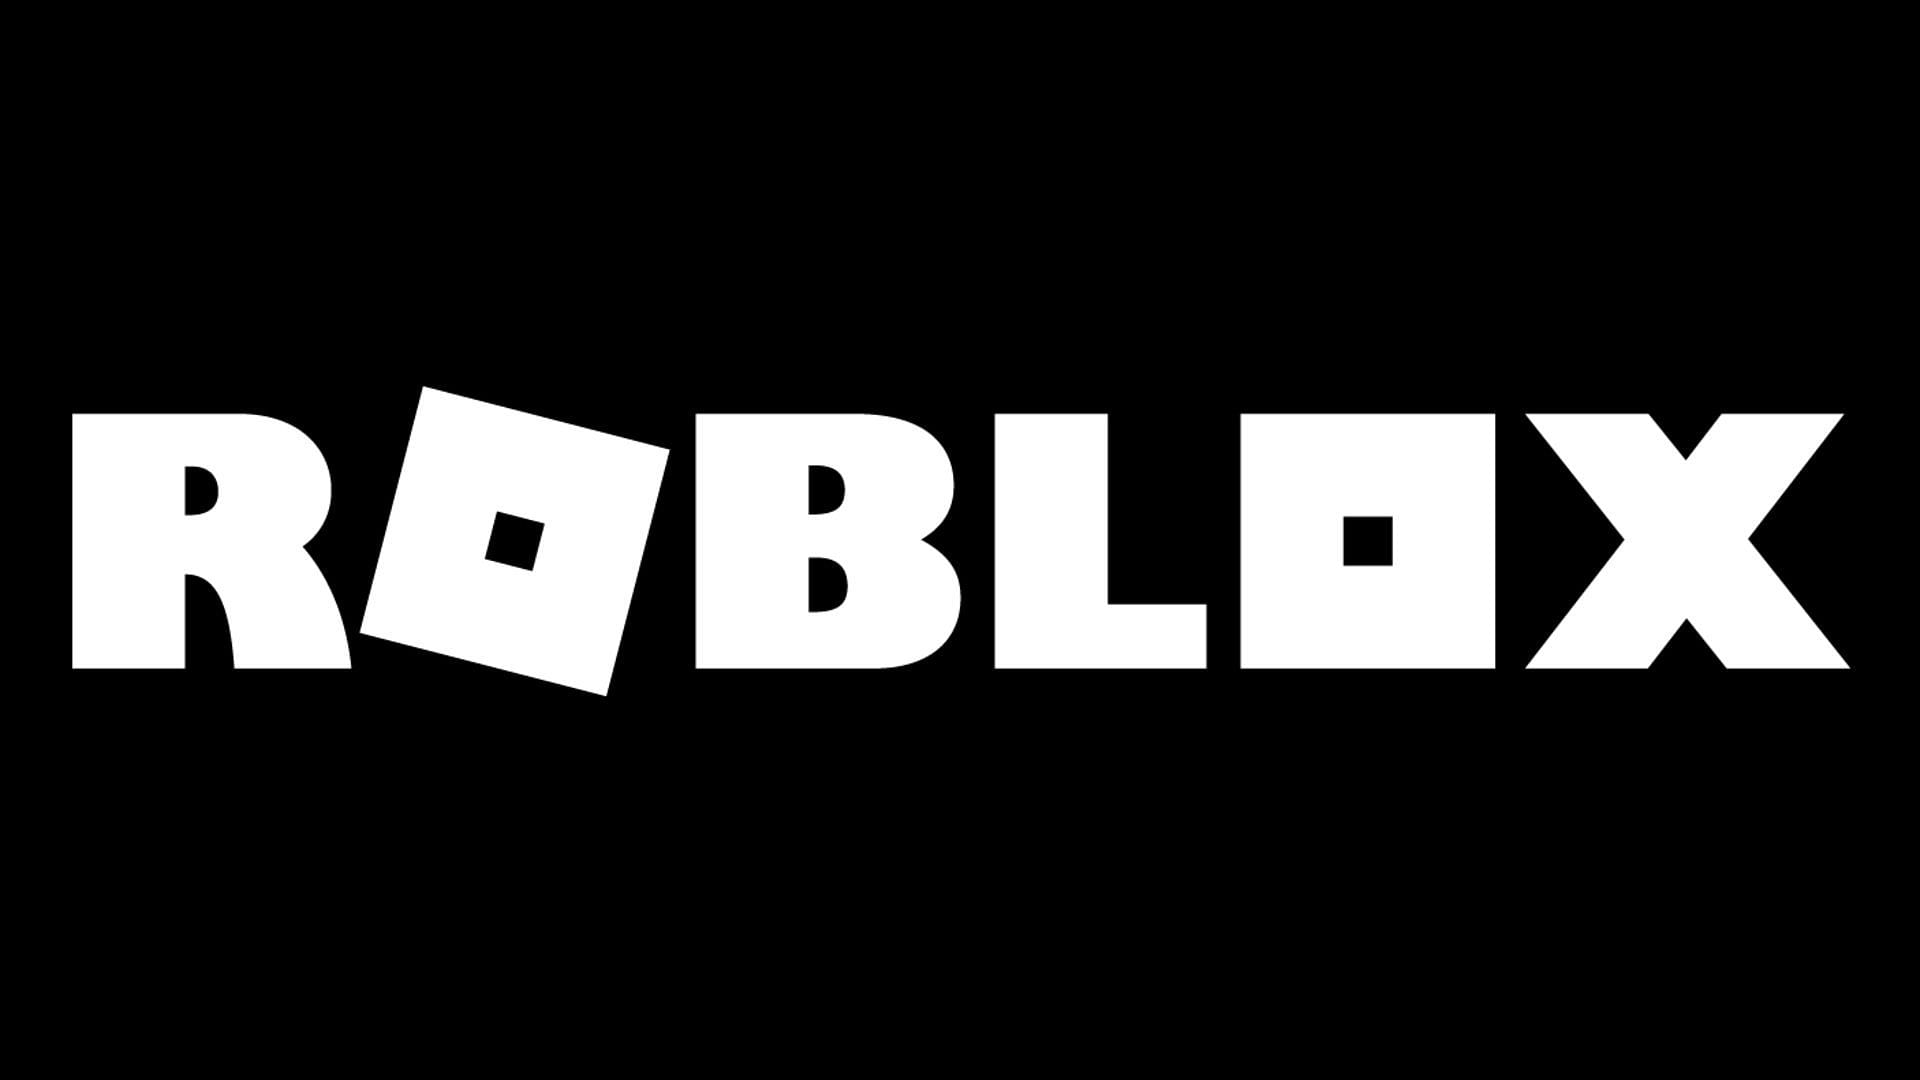 Can players win free Robux? (Image via Roblox)